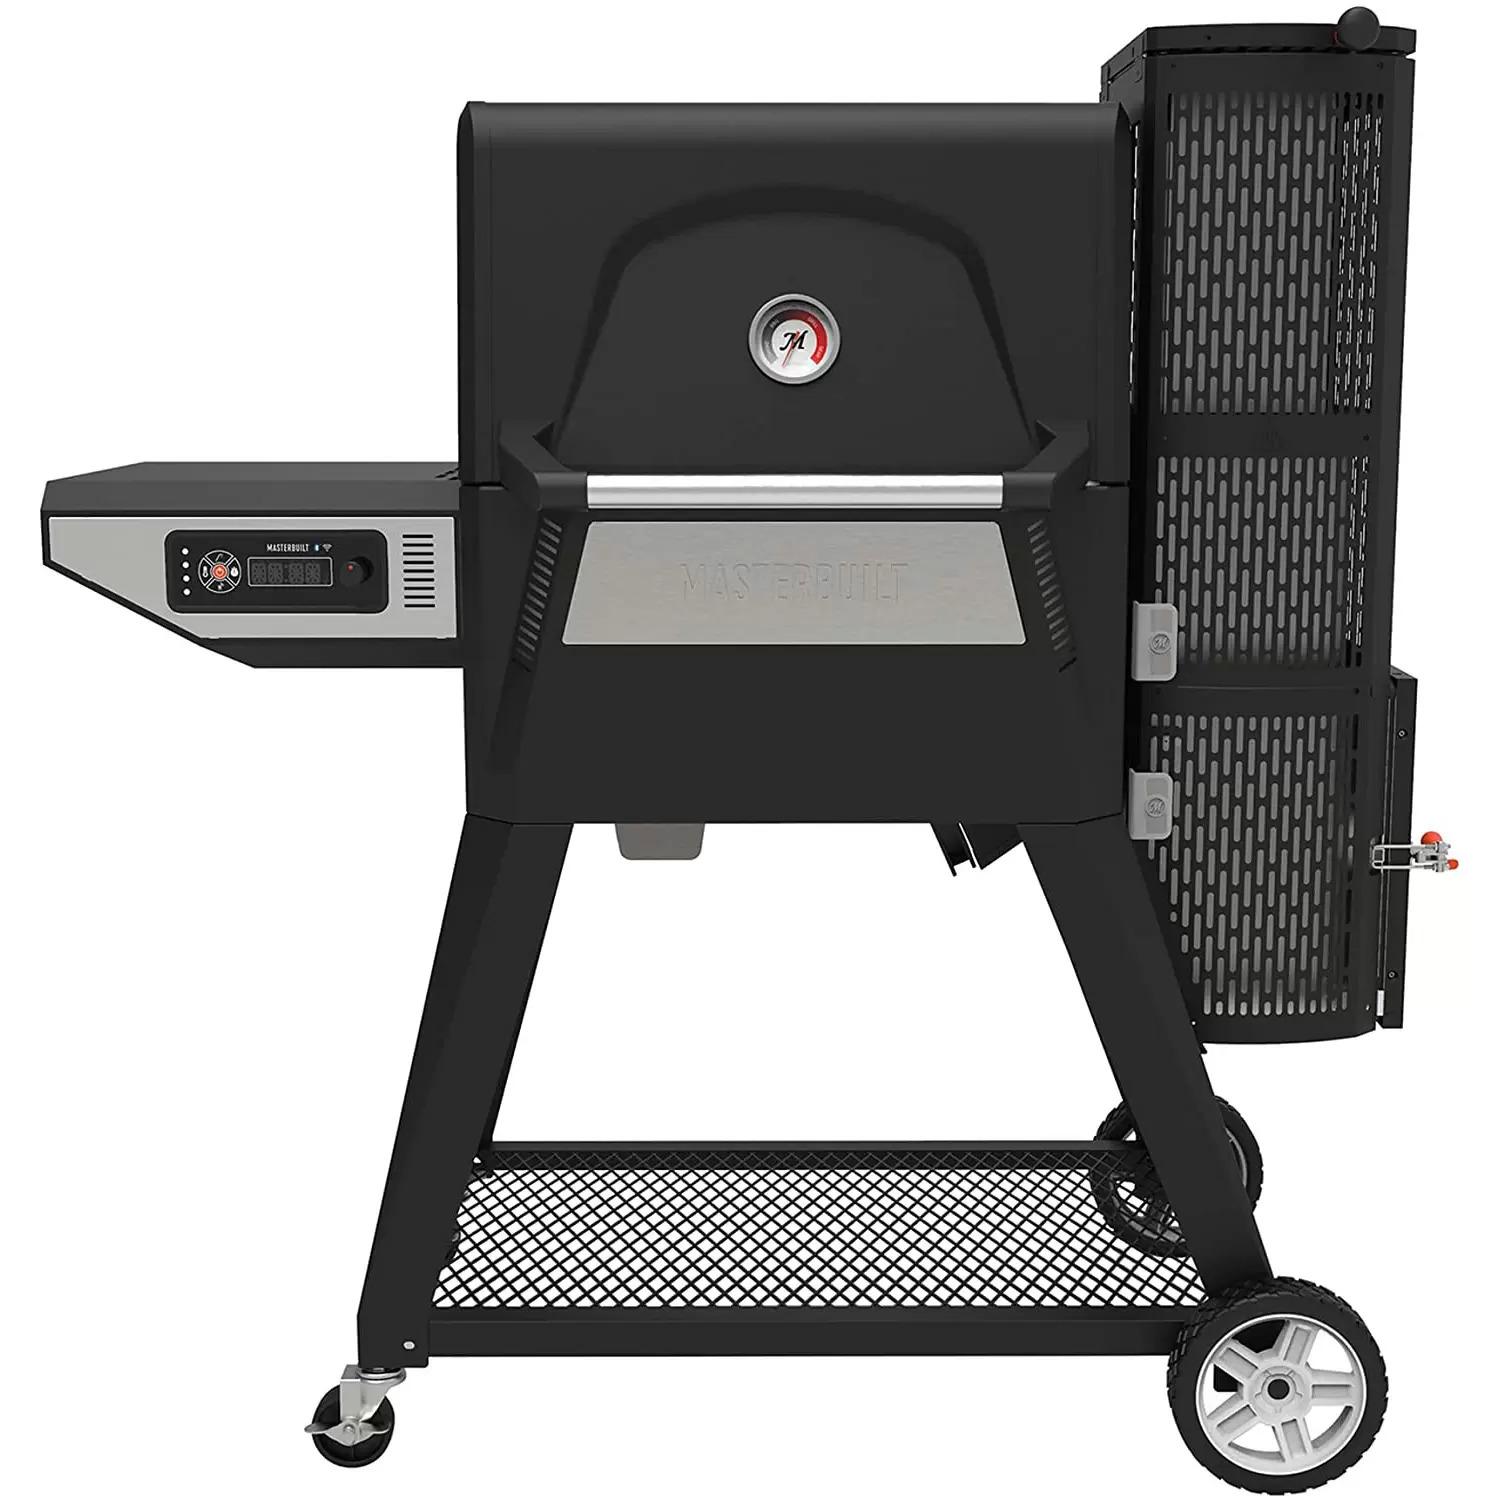 Masterbuilt Gravity Series 560 Digital Charcoal Grill and Smoker for $397.60 Shipped